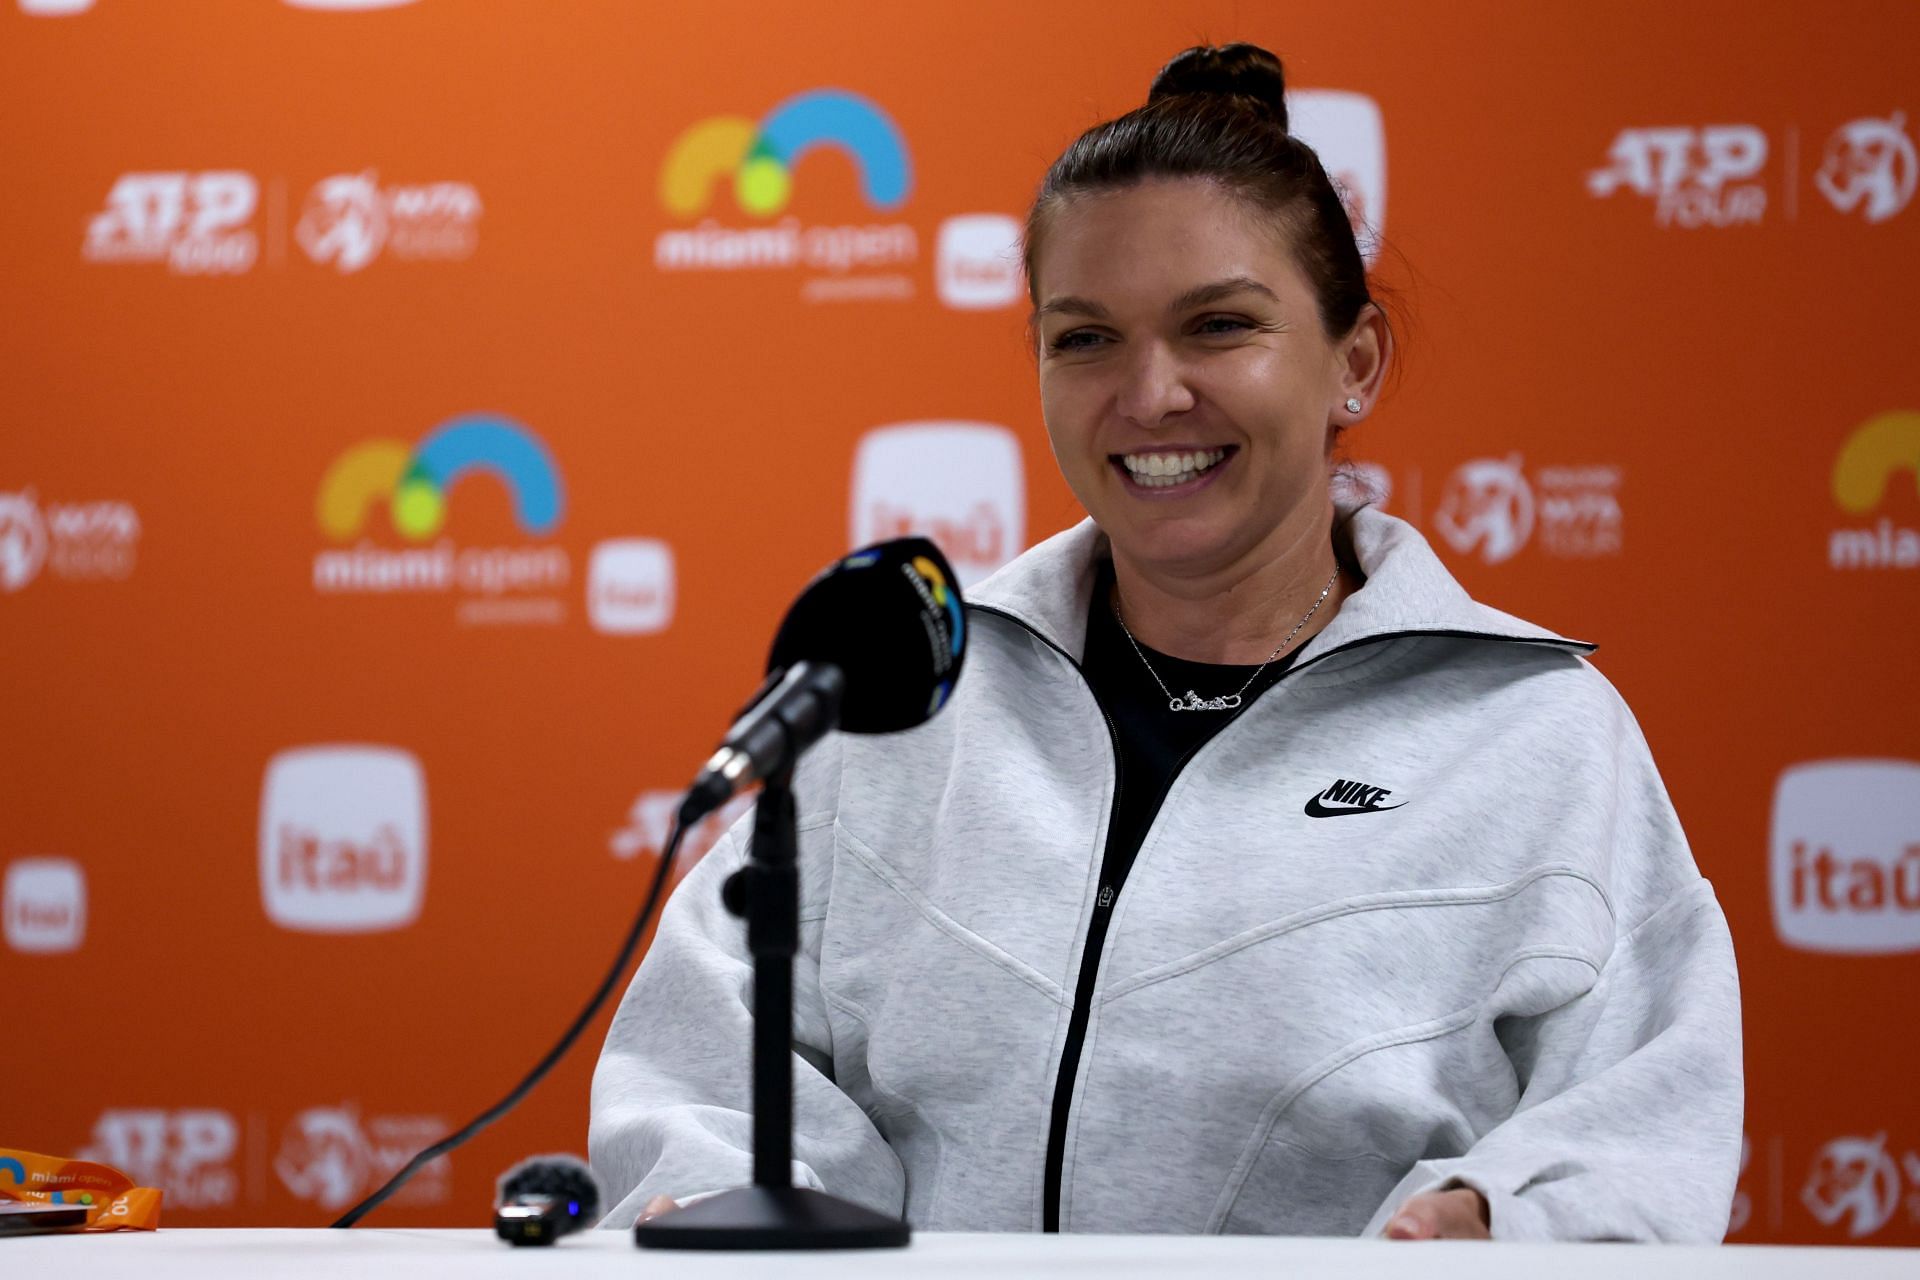 Halep has not been included in the Italian Open entry list